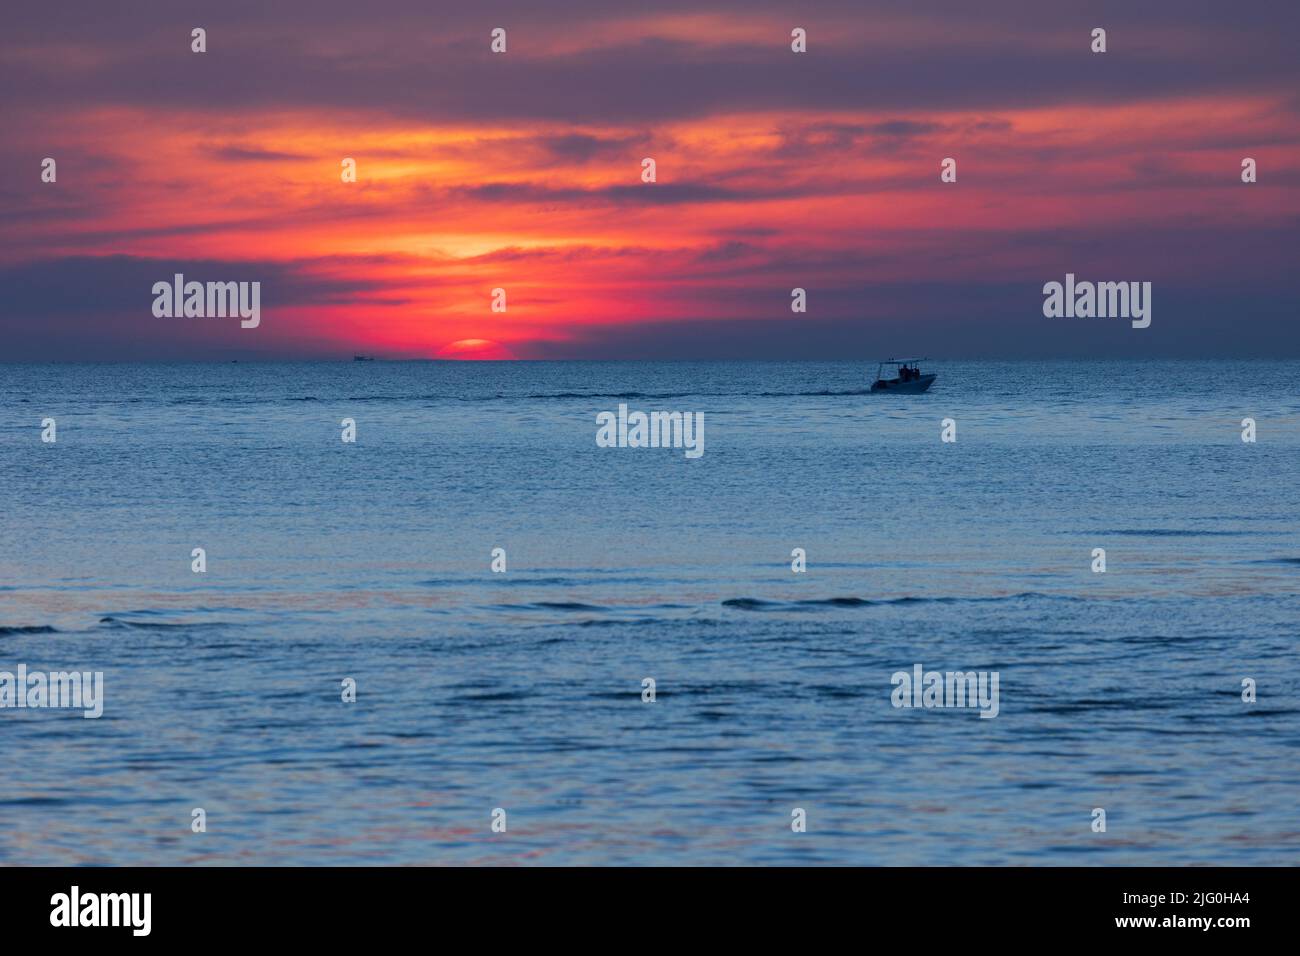 Colorful tropical sunset over the sea with a boat passing Stock Photo